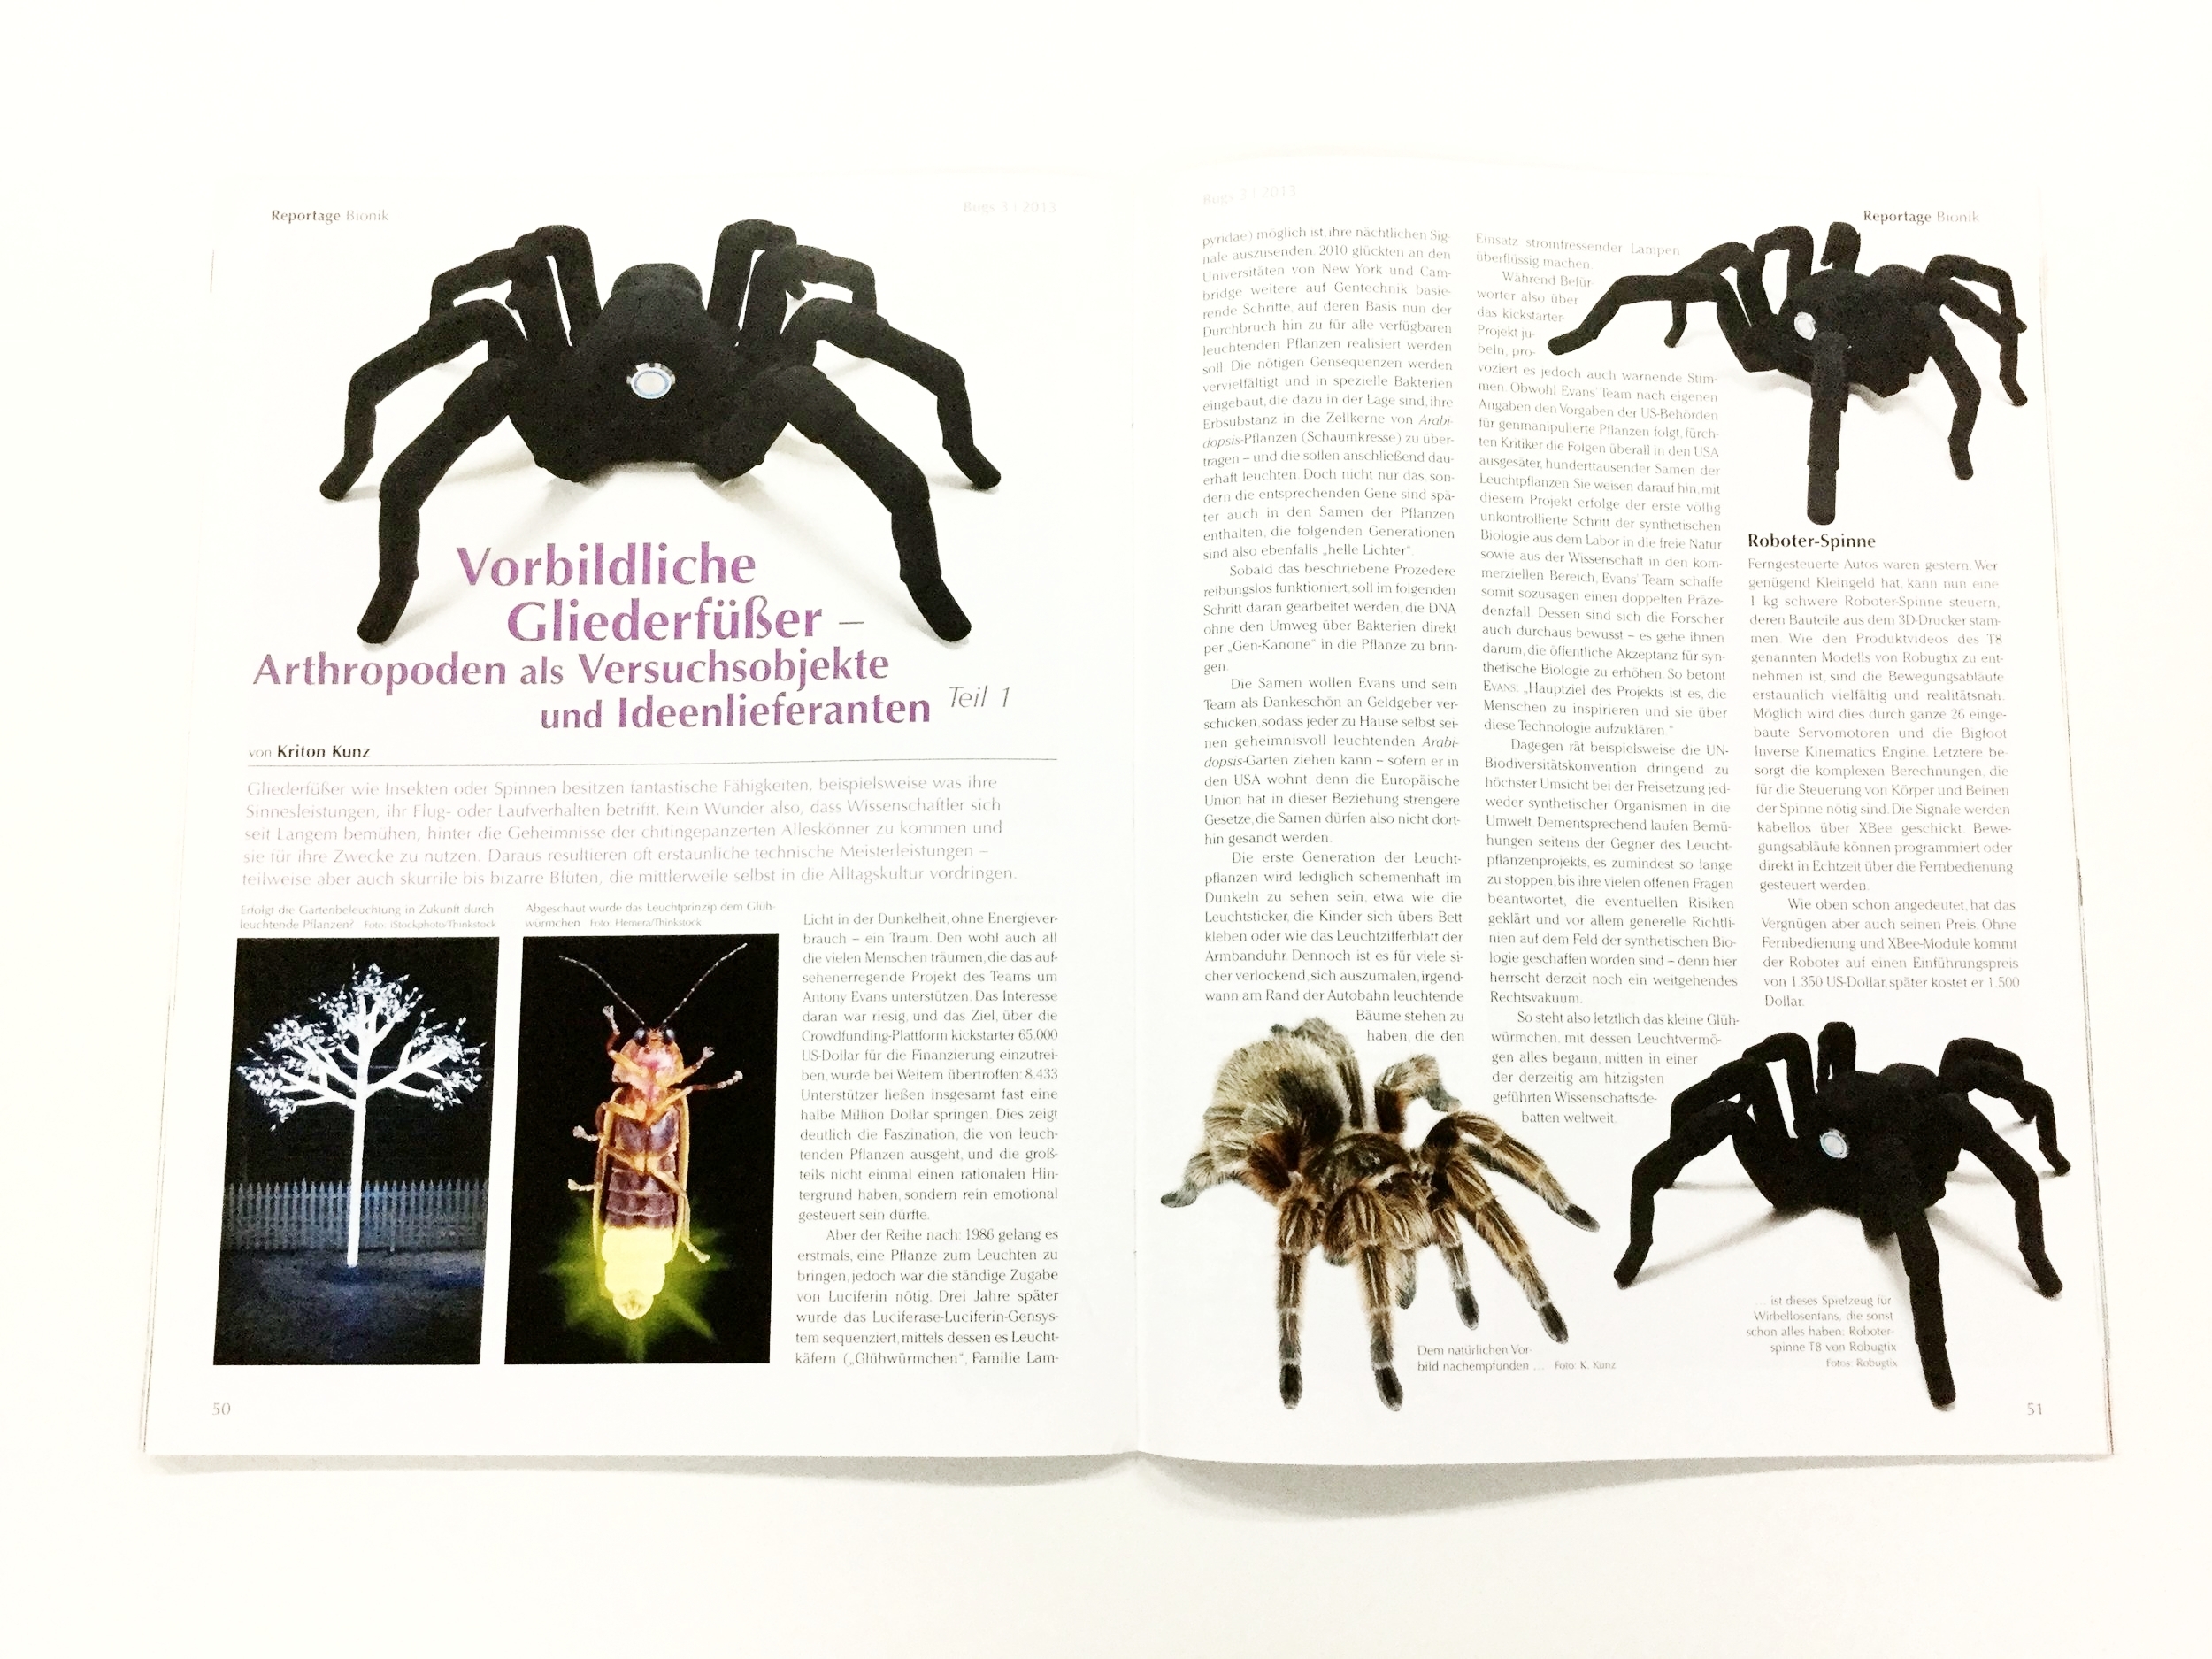 Bugs (p.51) - The T8 compared to real-life tarantulas